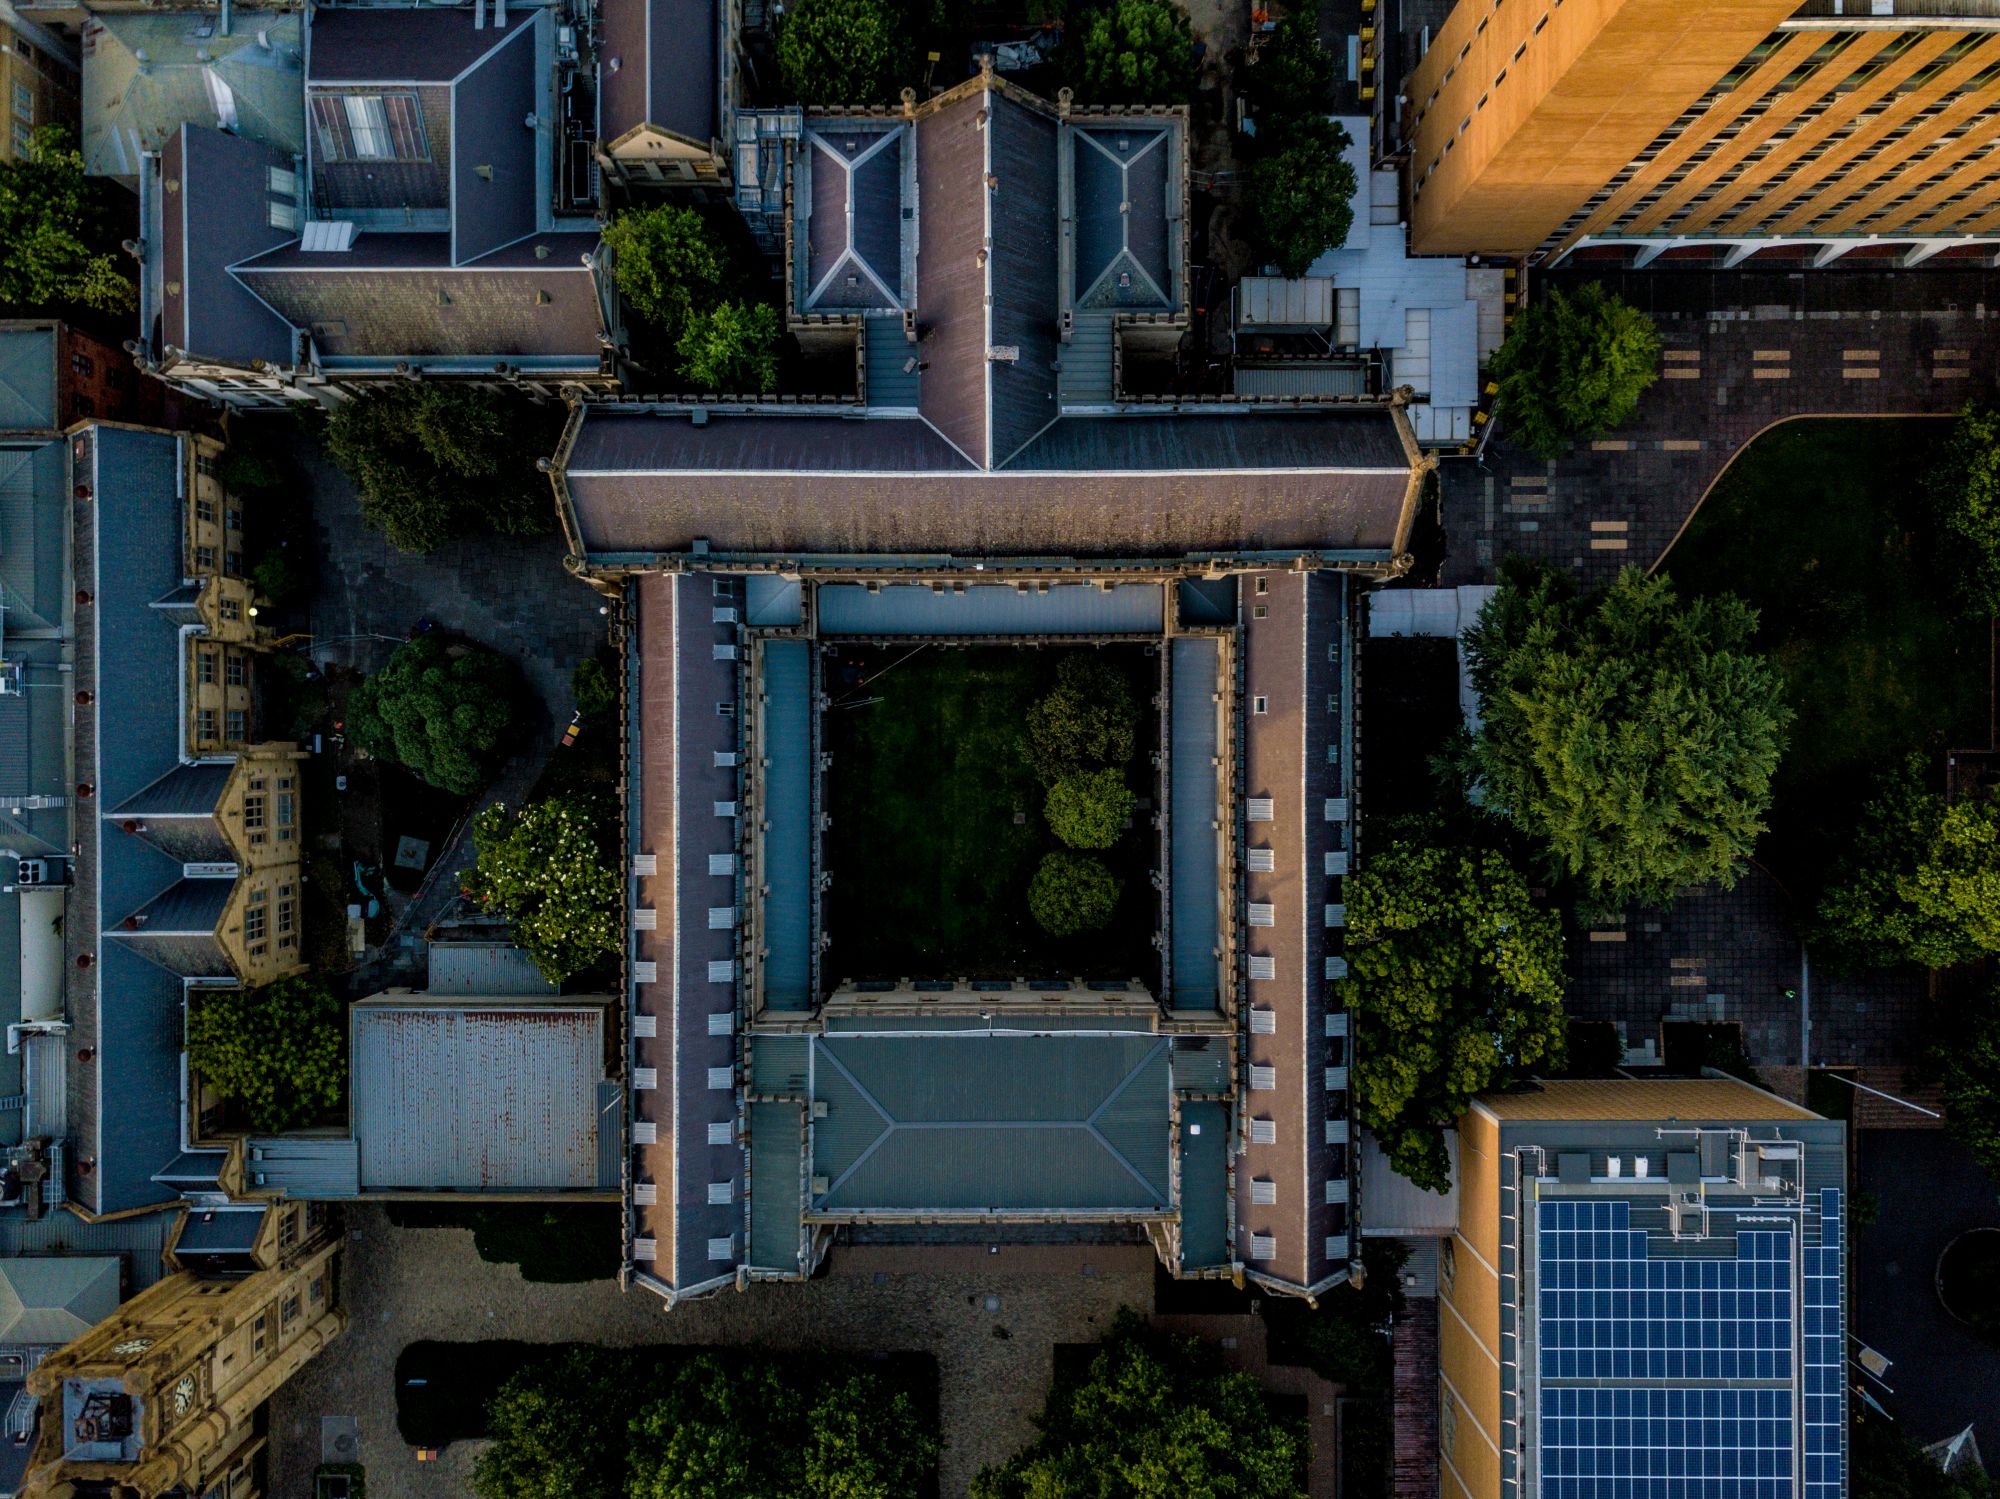 Ariel view of the old quad at the university of Melbourne